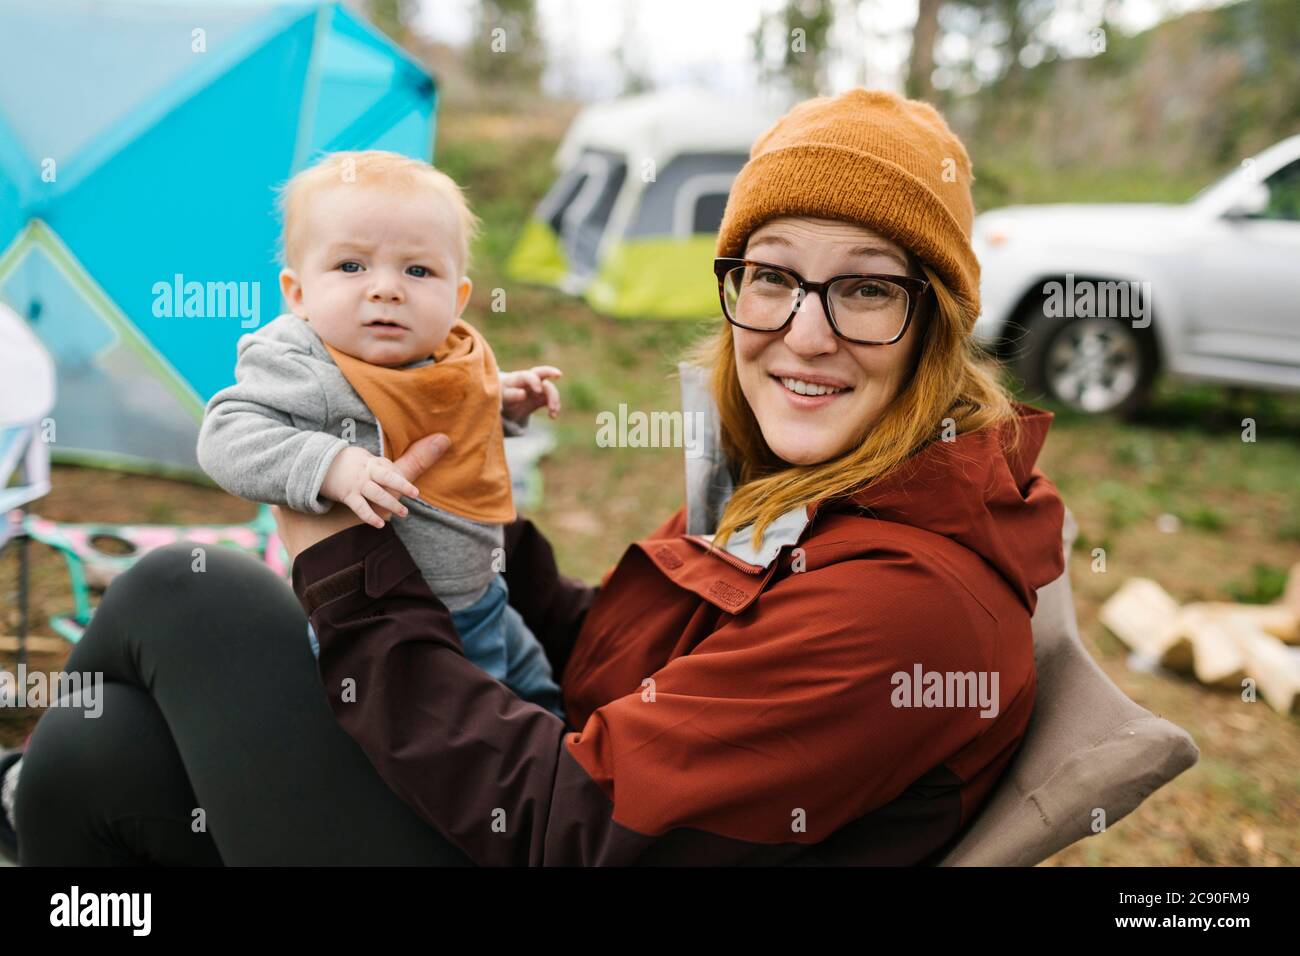 USA, Utah, Uninta Wasatch cache National Forest, mère Holding son (6-11 mois) en camping Banque D'Images